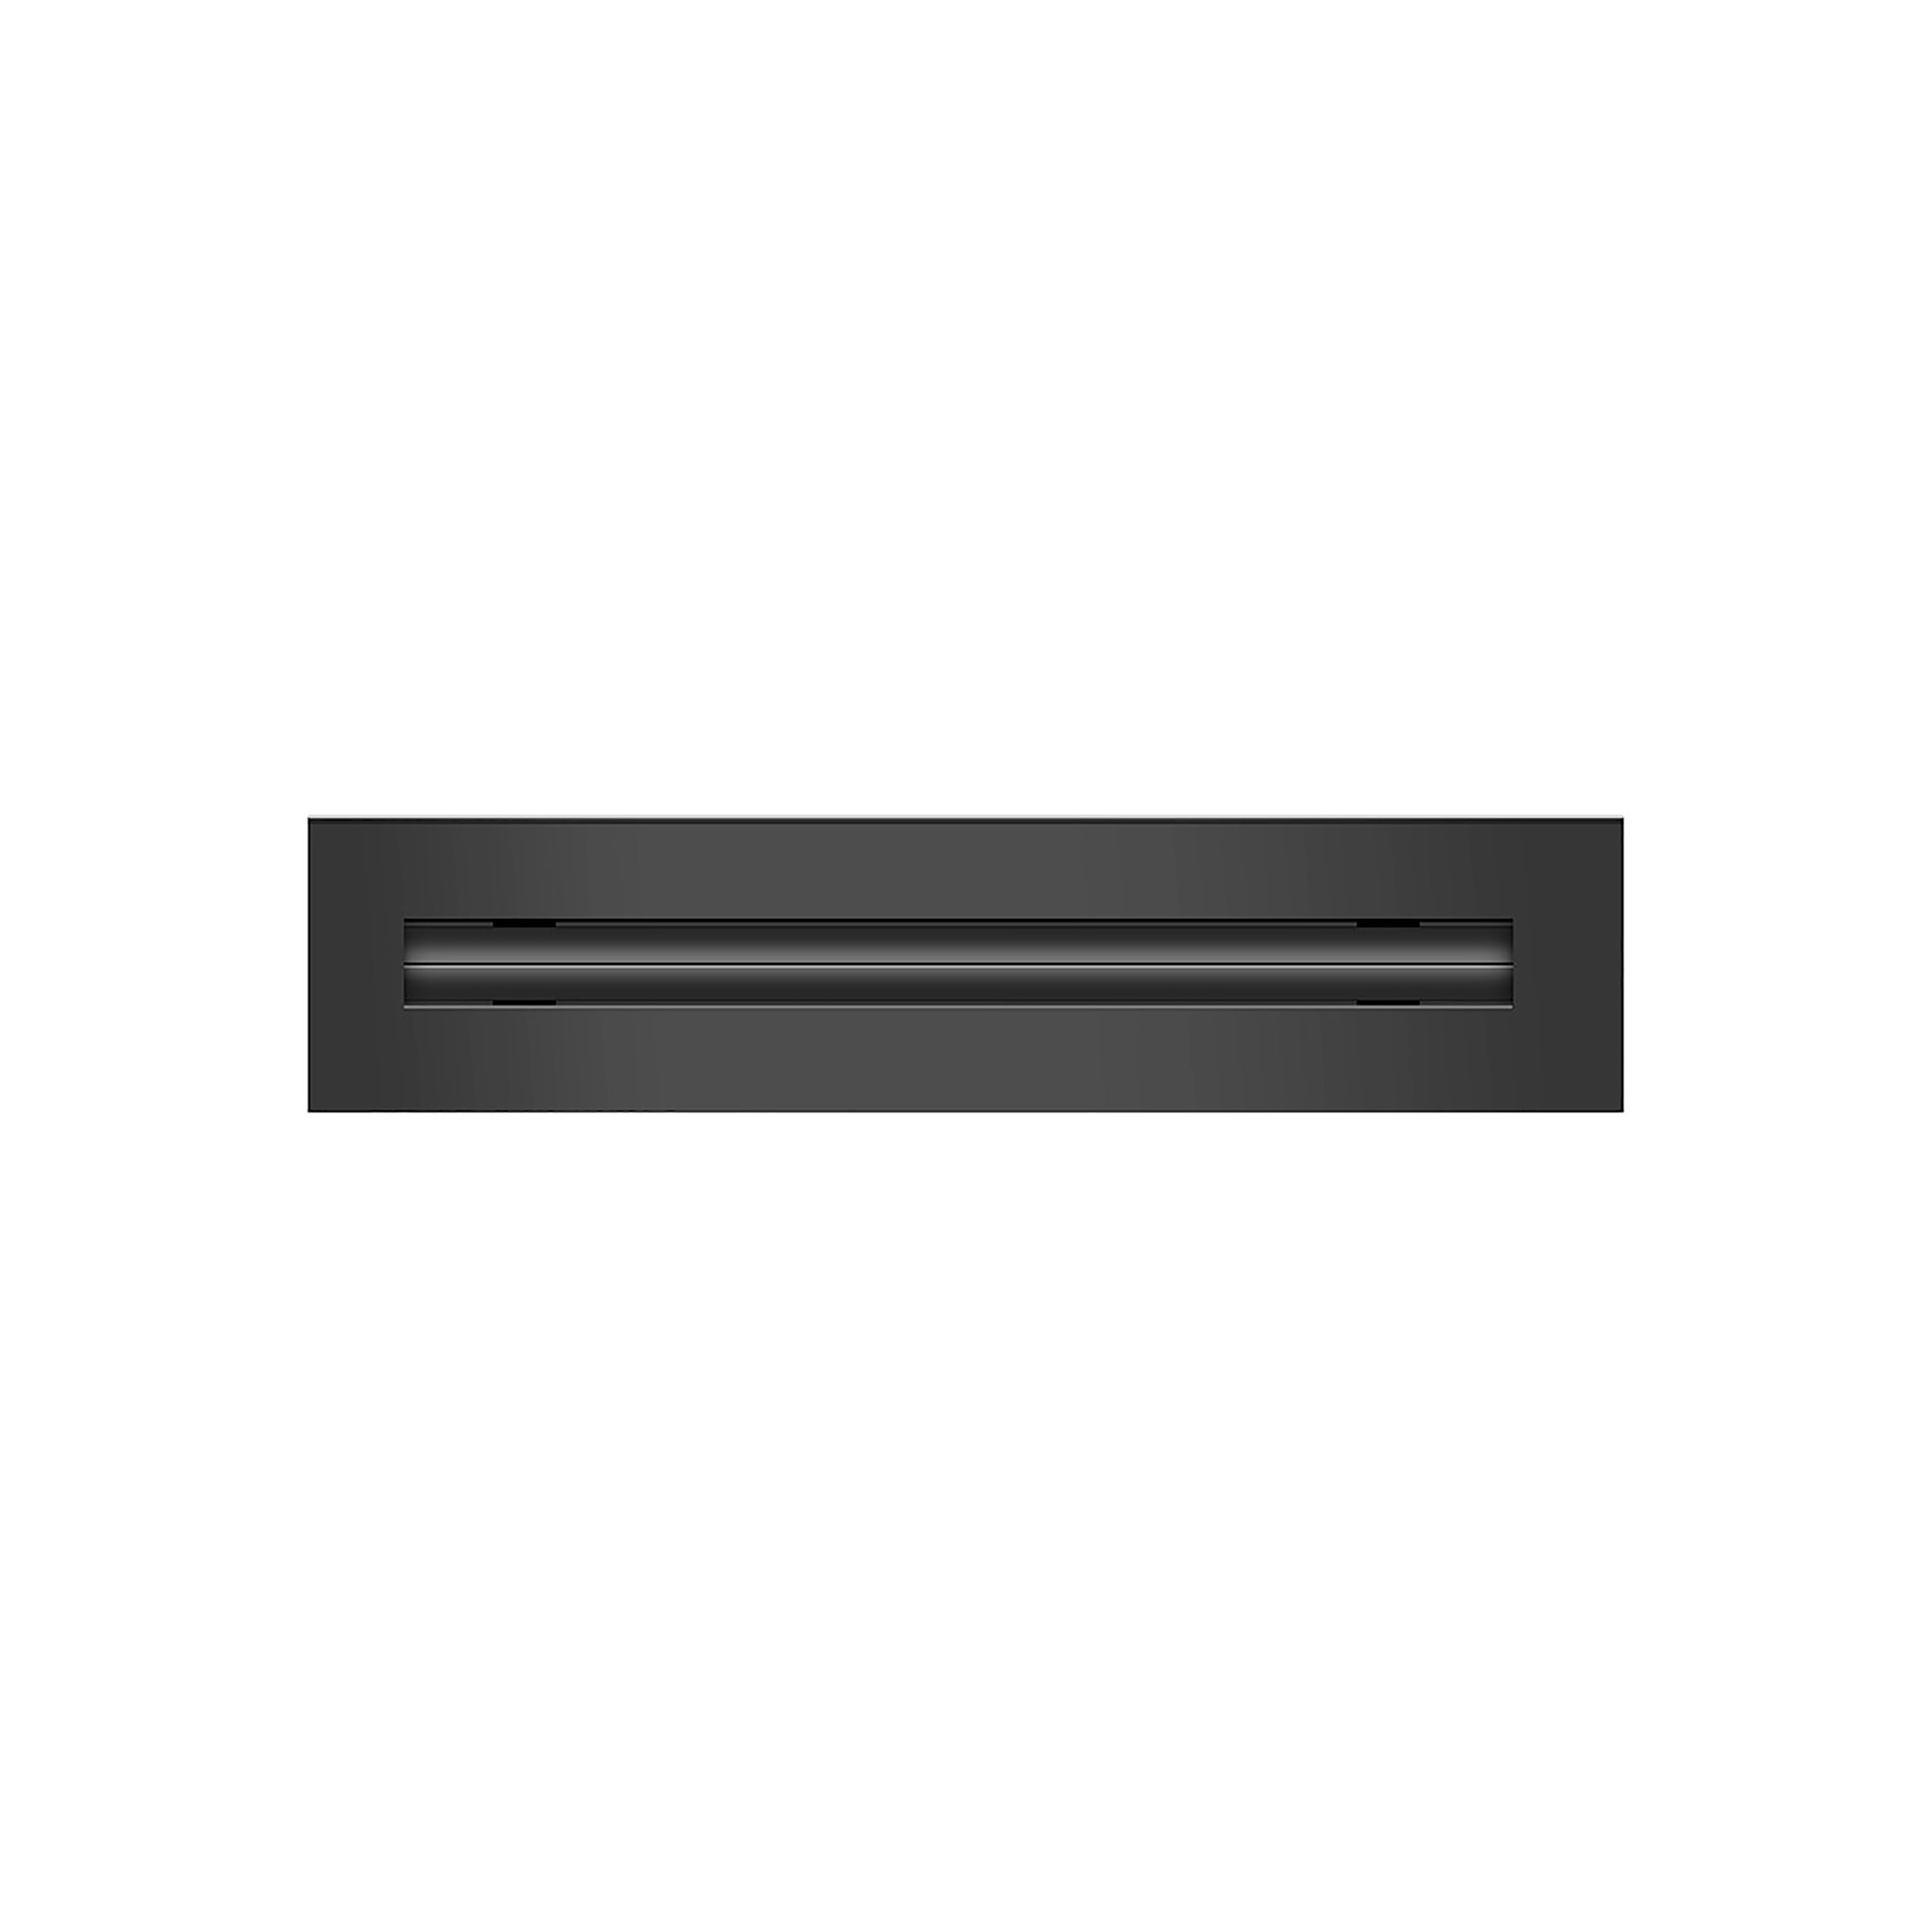 Front of 12 Inch 1 Slot Linear Air Vent Cover Black - 12 Inch 1 Slot Linear Diffuser Black - Texas Buildmart